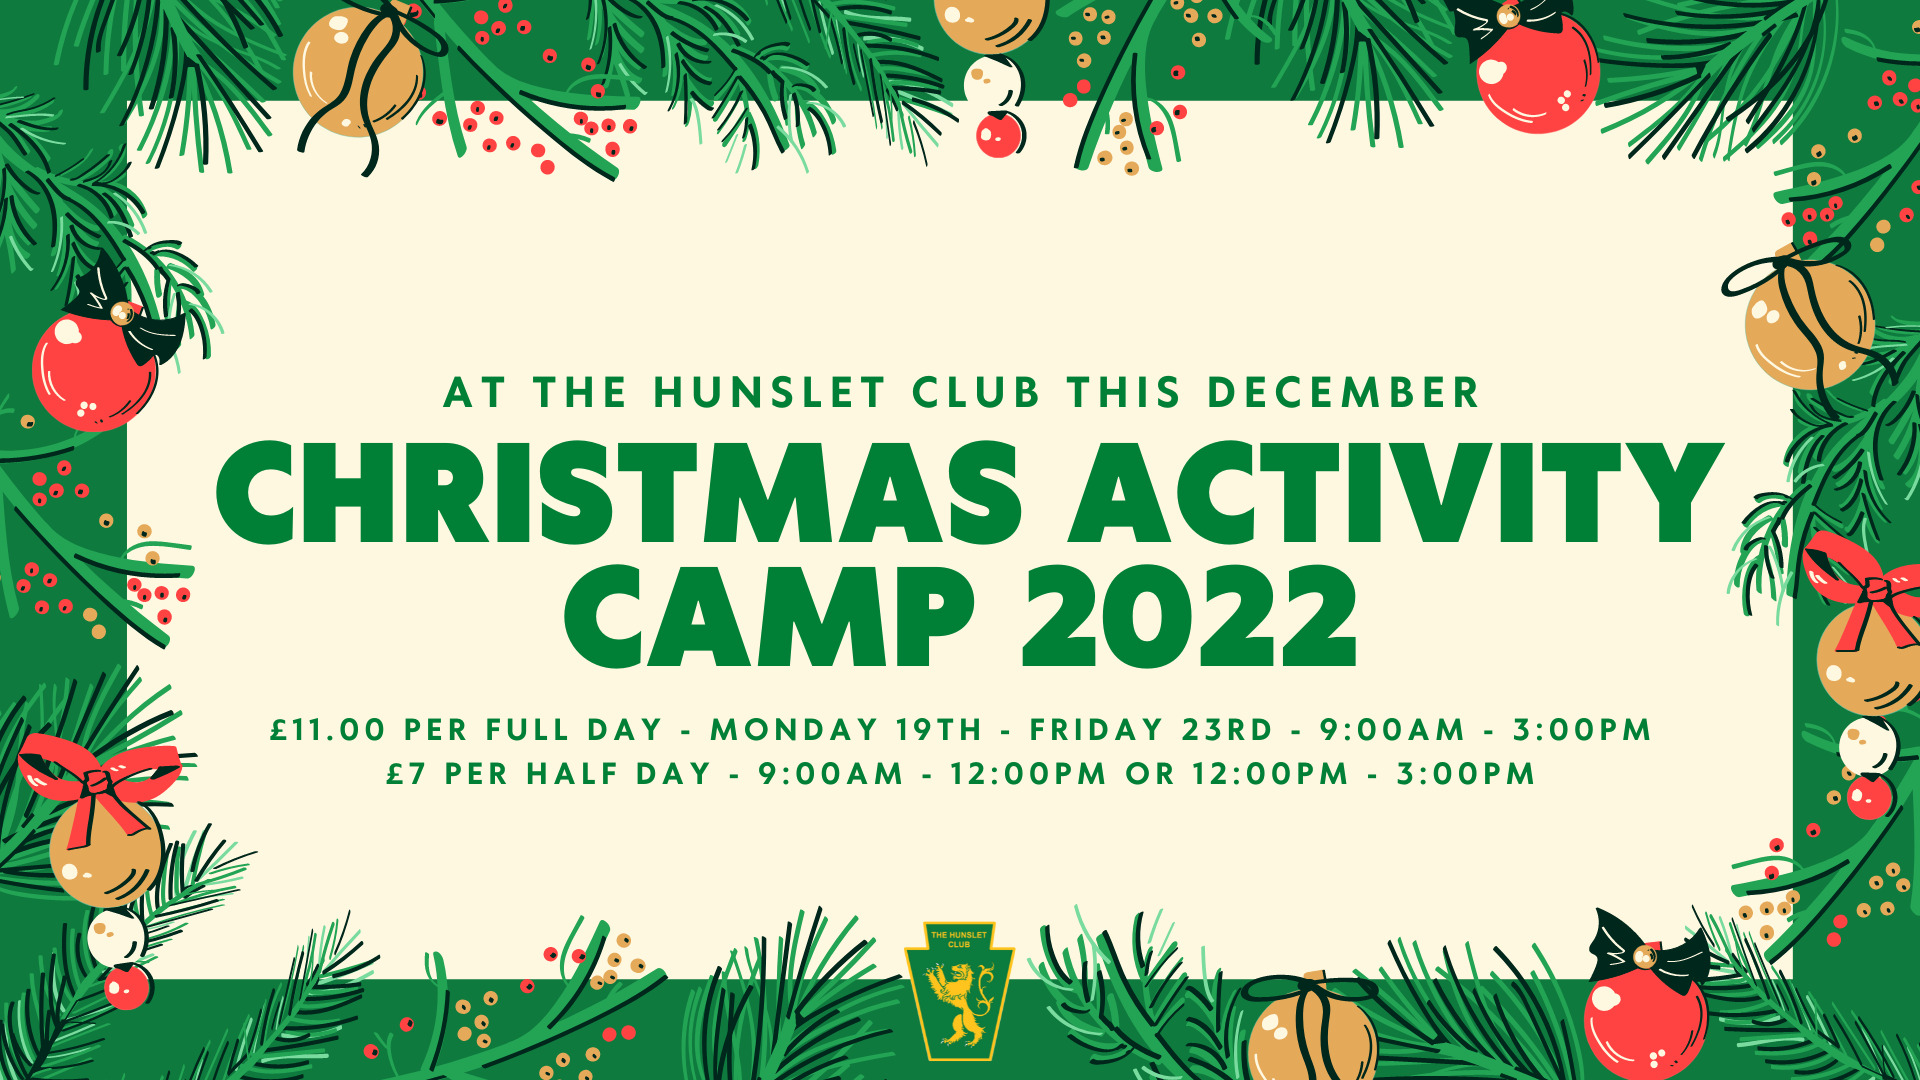 At the Hunslet Club This December. Christmas Activity Camp 2022. £11.00 per full day - Monday 19th - FRIDAY 23RD - 9:00AM - 3:00pm £7 PER HALF DAY - 9:00AM - 12:00PM OR 12:00PM - 3:00PM